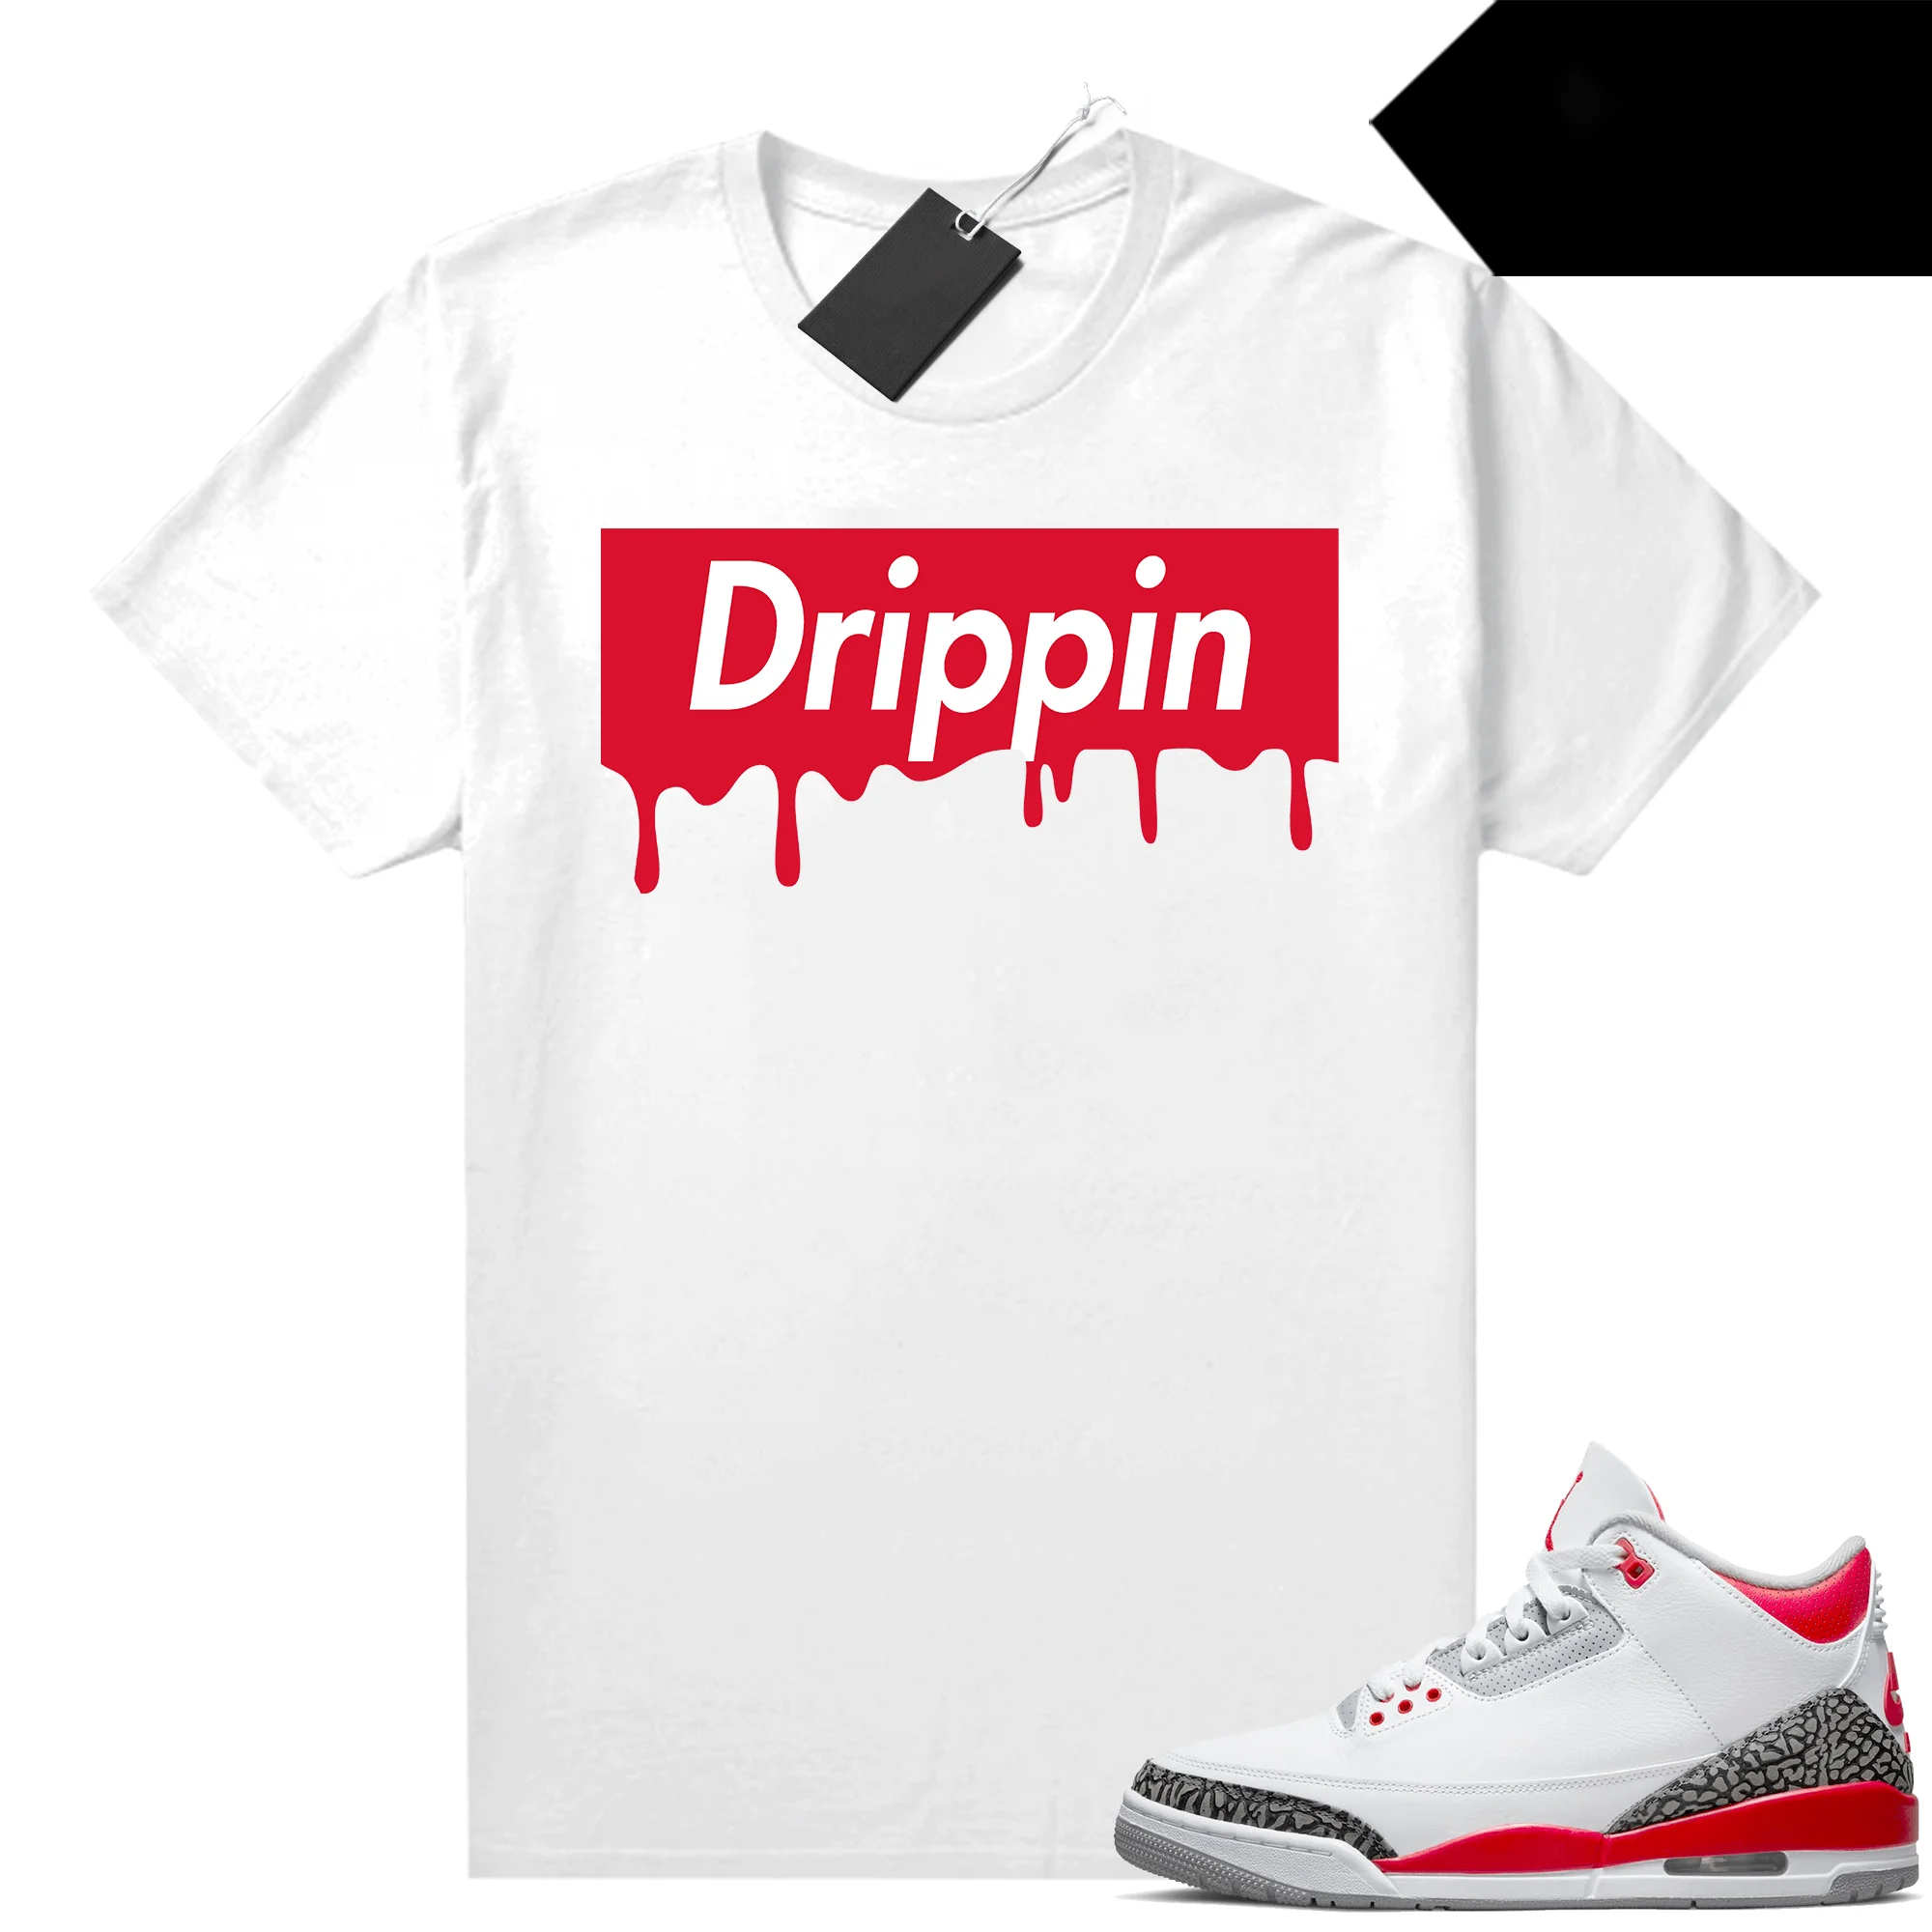 

Fire Red 3s Shirts Sneaker Match White Drippin Box Sneaker Clothing 100% Cotton Unisex Graphic T Shirts For Men